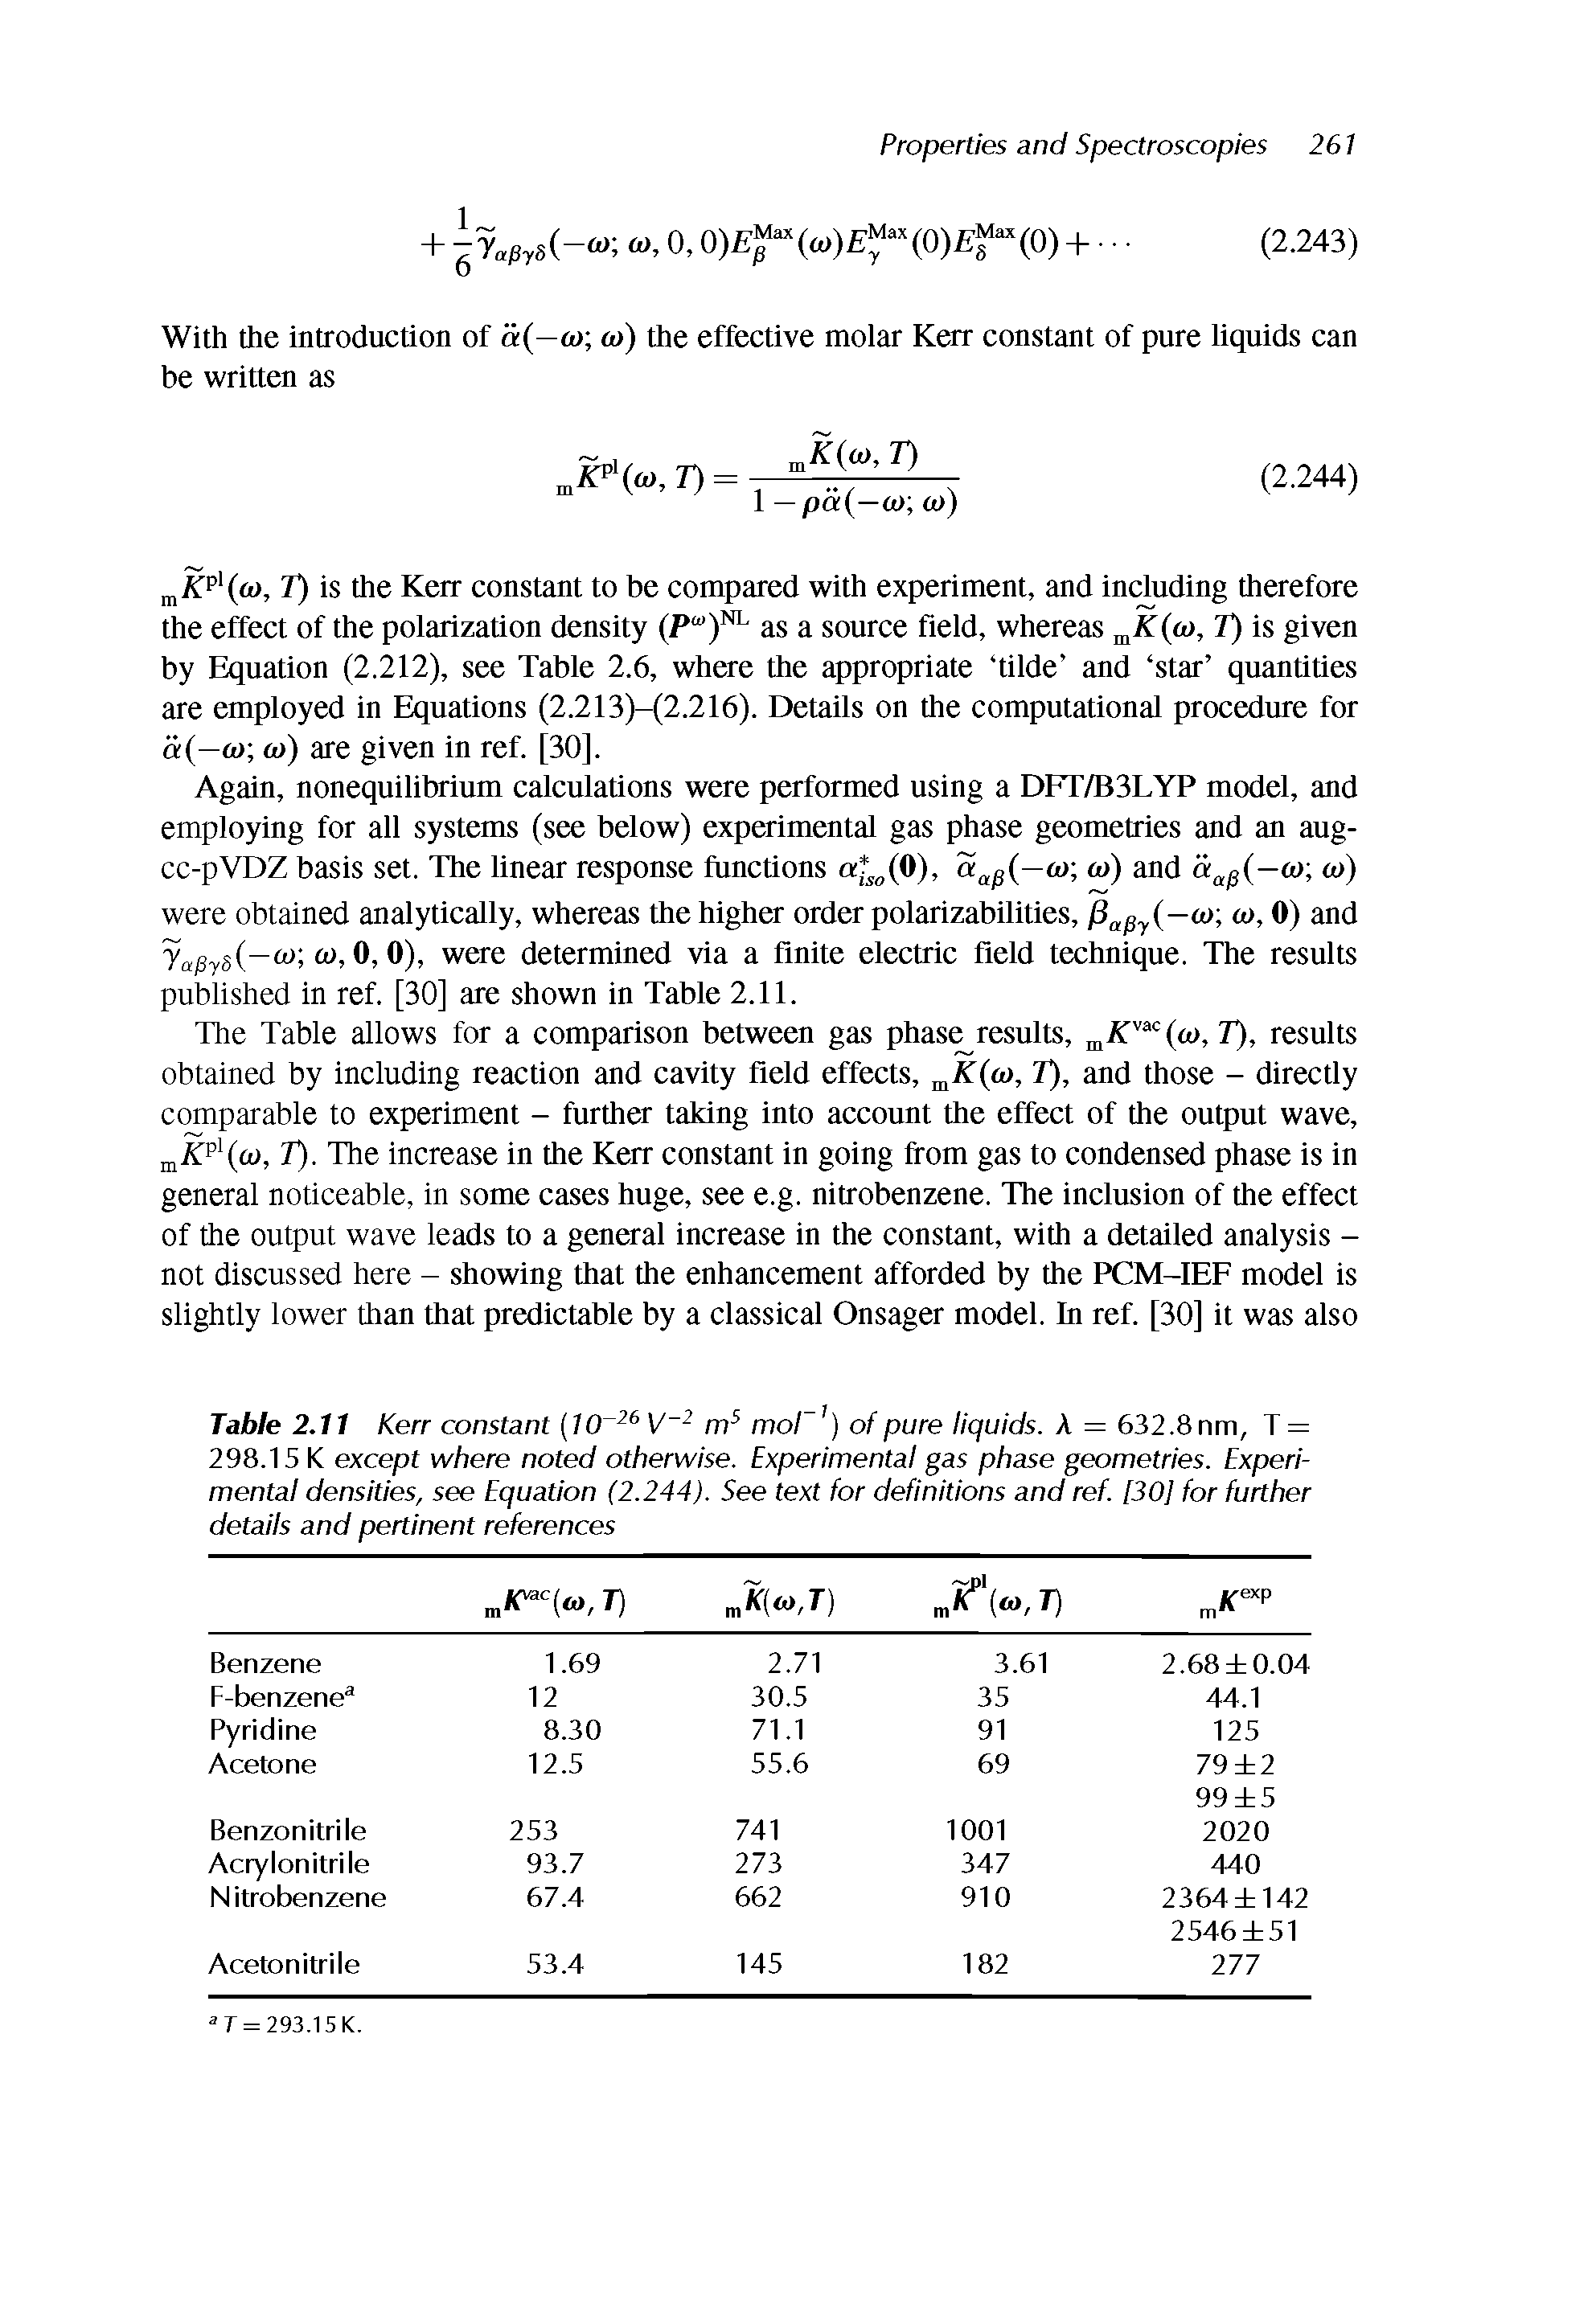 Table 2.11 Kerr constant (10 26 V 2 m5 moF1) of pure liquids. A = 632.8nm, T = 298.15 K except where noted otherwise. Experimental gas phatse geometries. Experimental densities, see Equation (2.244). See text for definitions and ref. [30] for further details and pertinent references...